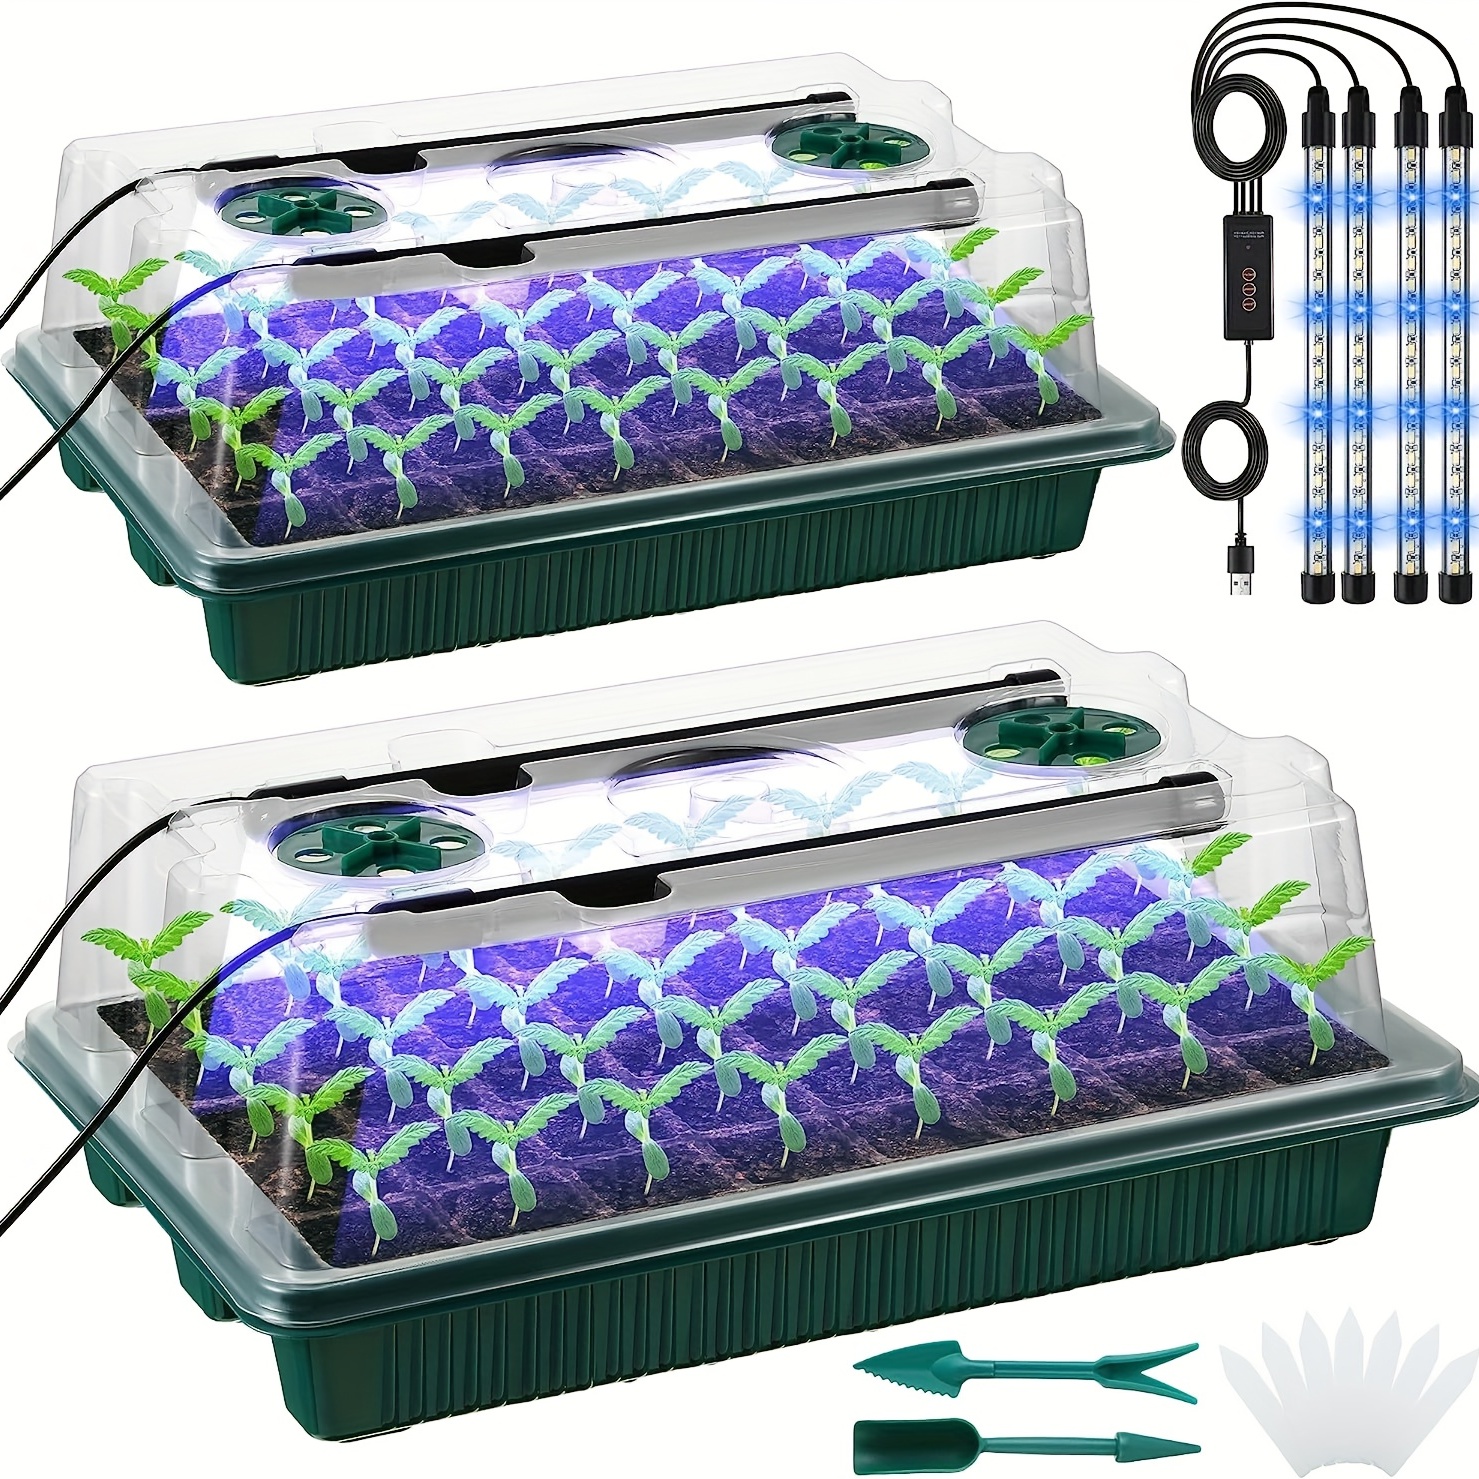 

2 Pack Seed Starter Trays With High Dome Germination Kit - 80 Cells, 4 Led Grow Lights, Smart Timer & 3 Modes For Home Gardeners And Indoor Greenhouse Seedling Starter Kit